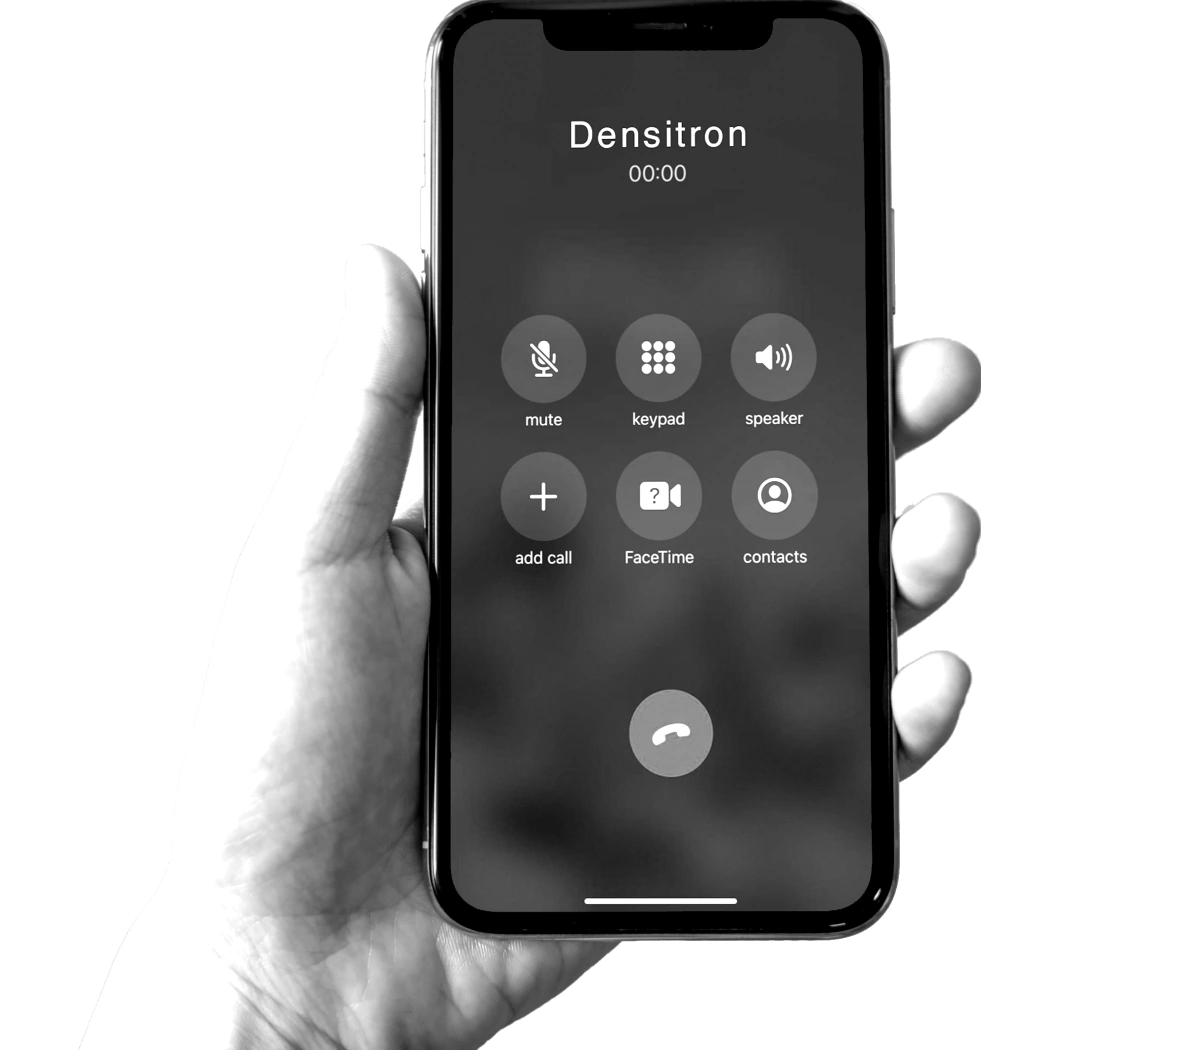 Mobile phone making a call to Densitron